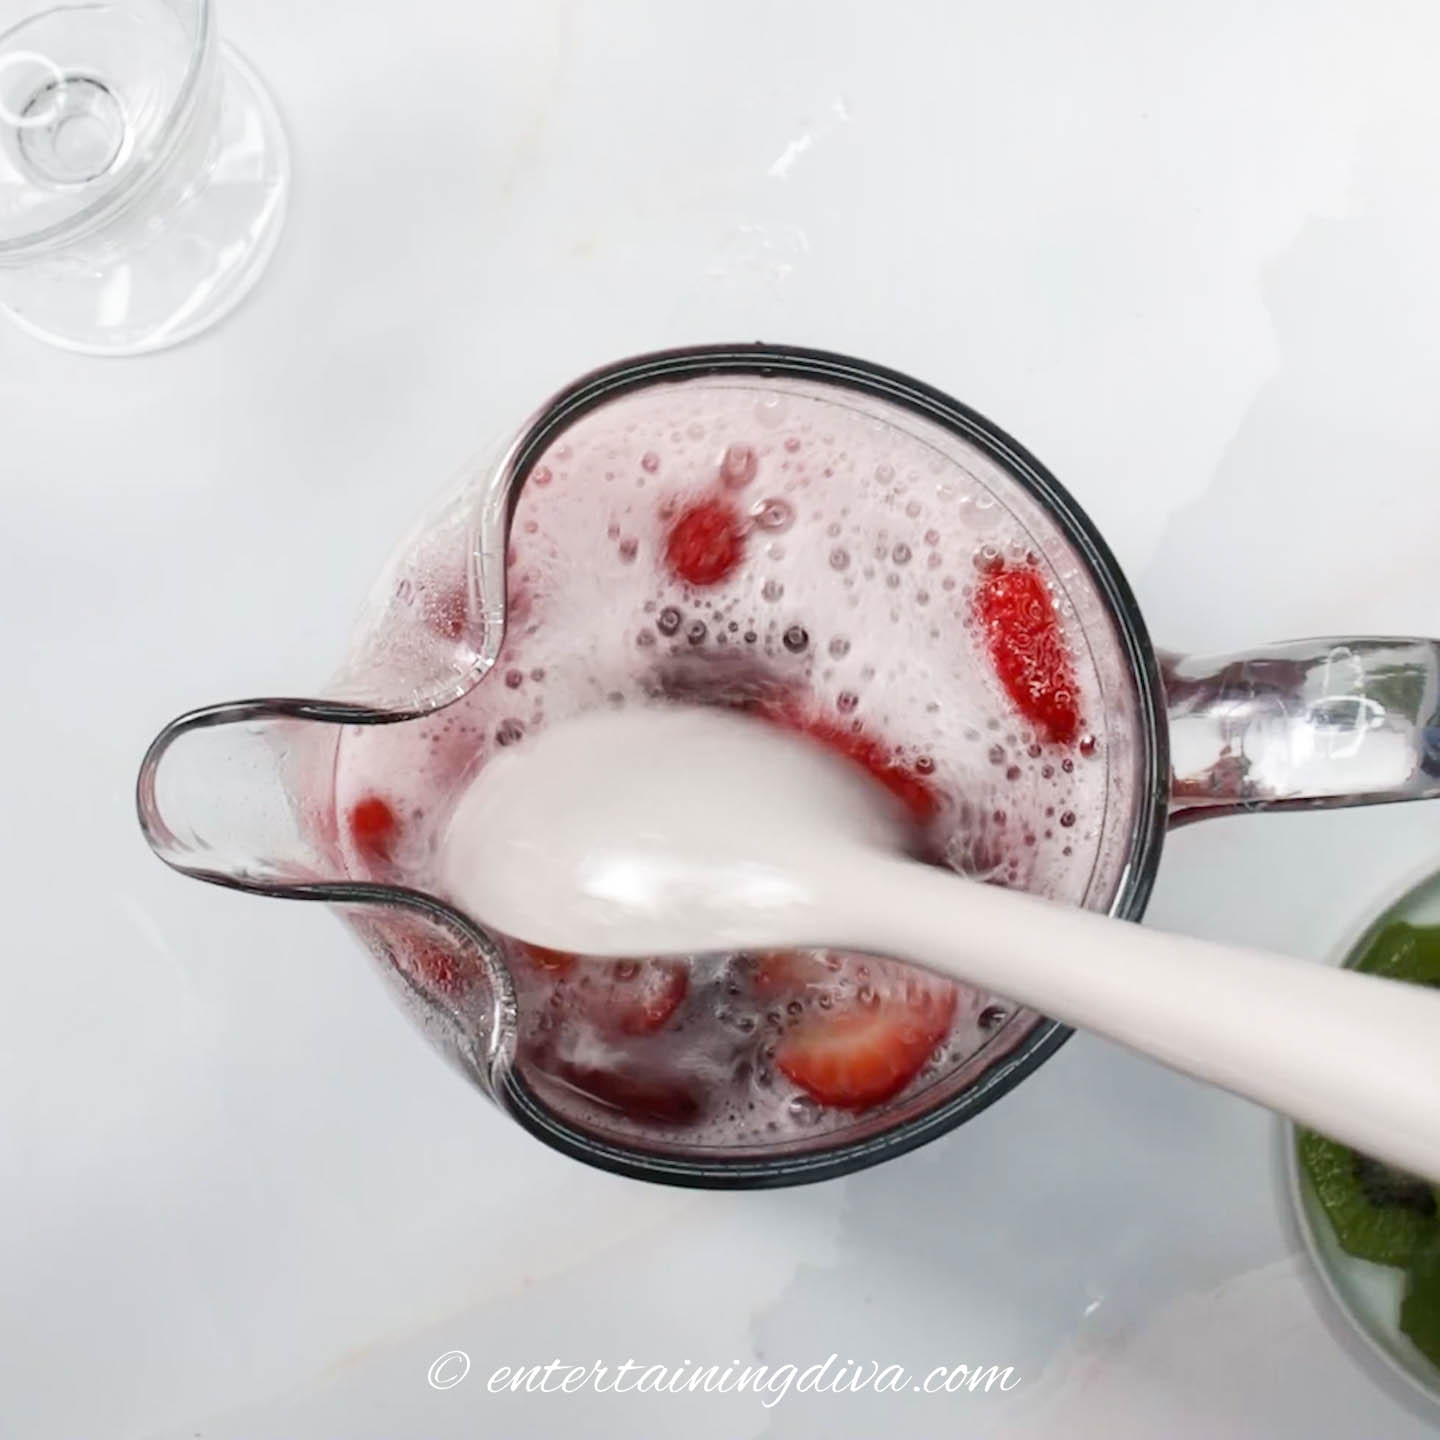 Spoon stirring Sangria in a pitcher